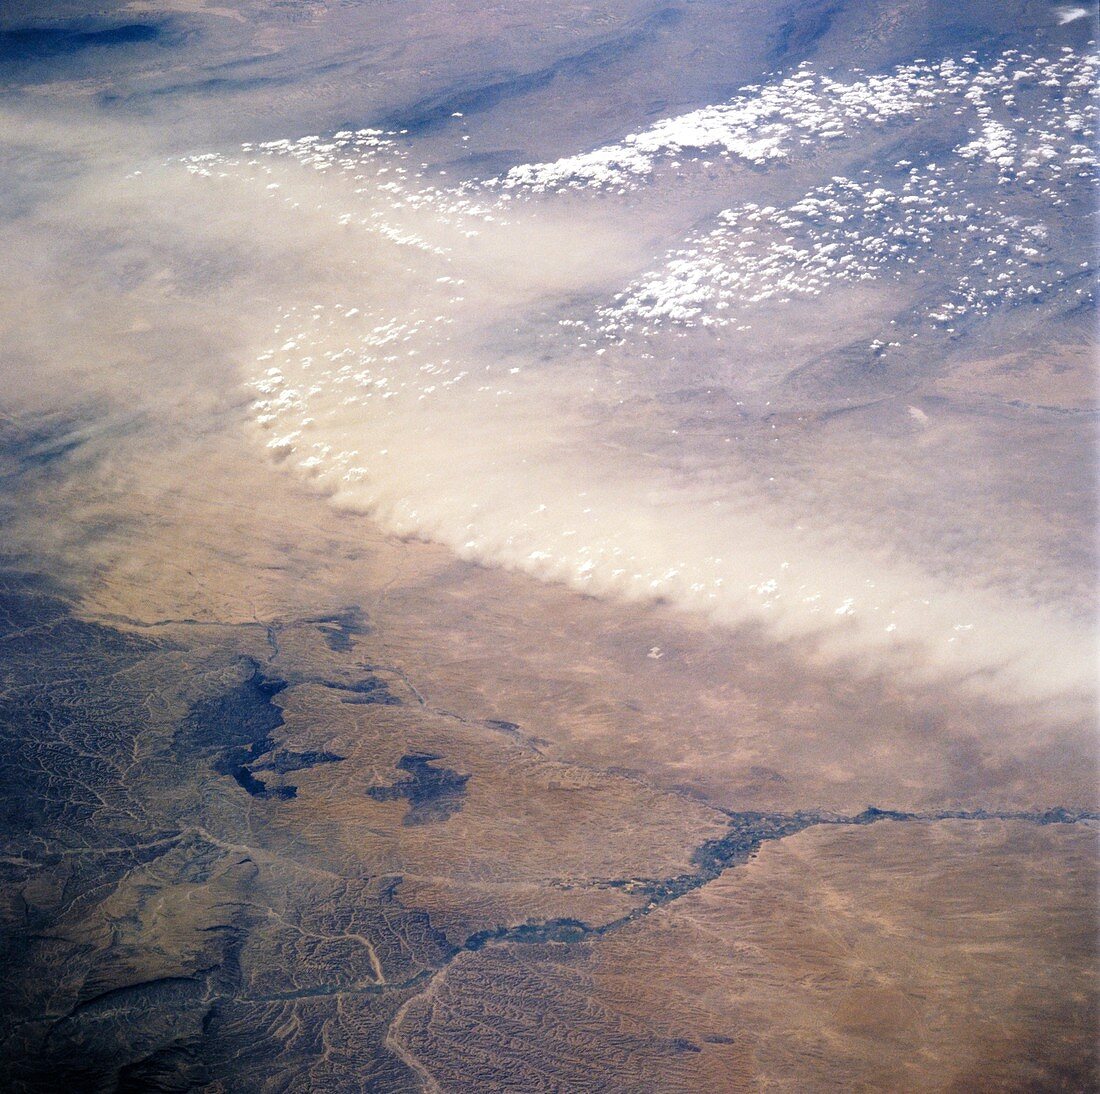 Afghan dust storms,space shuttle image